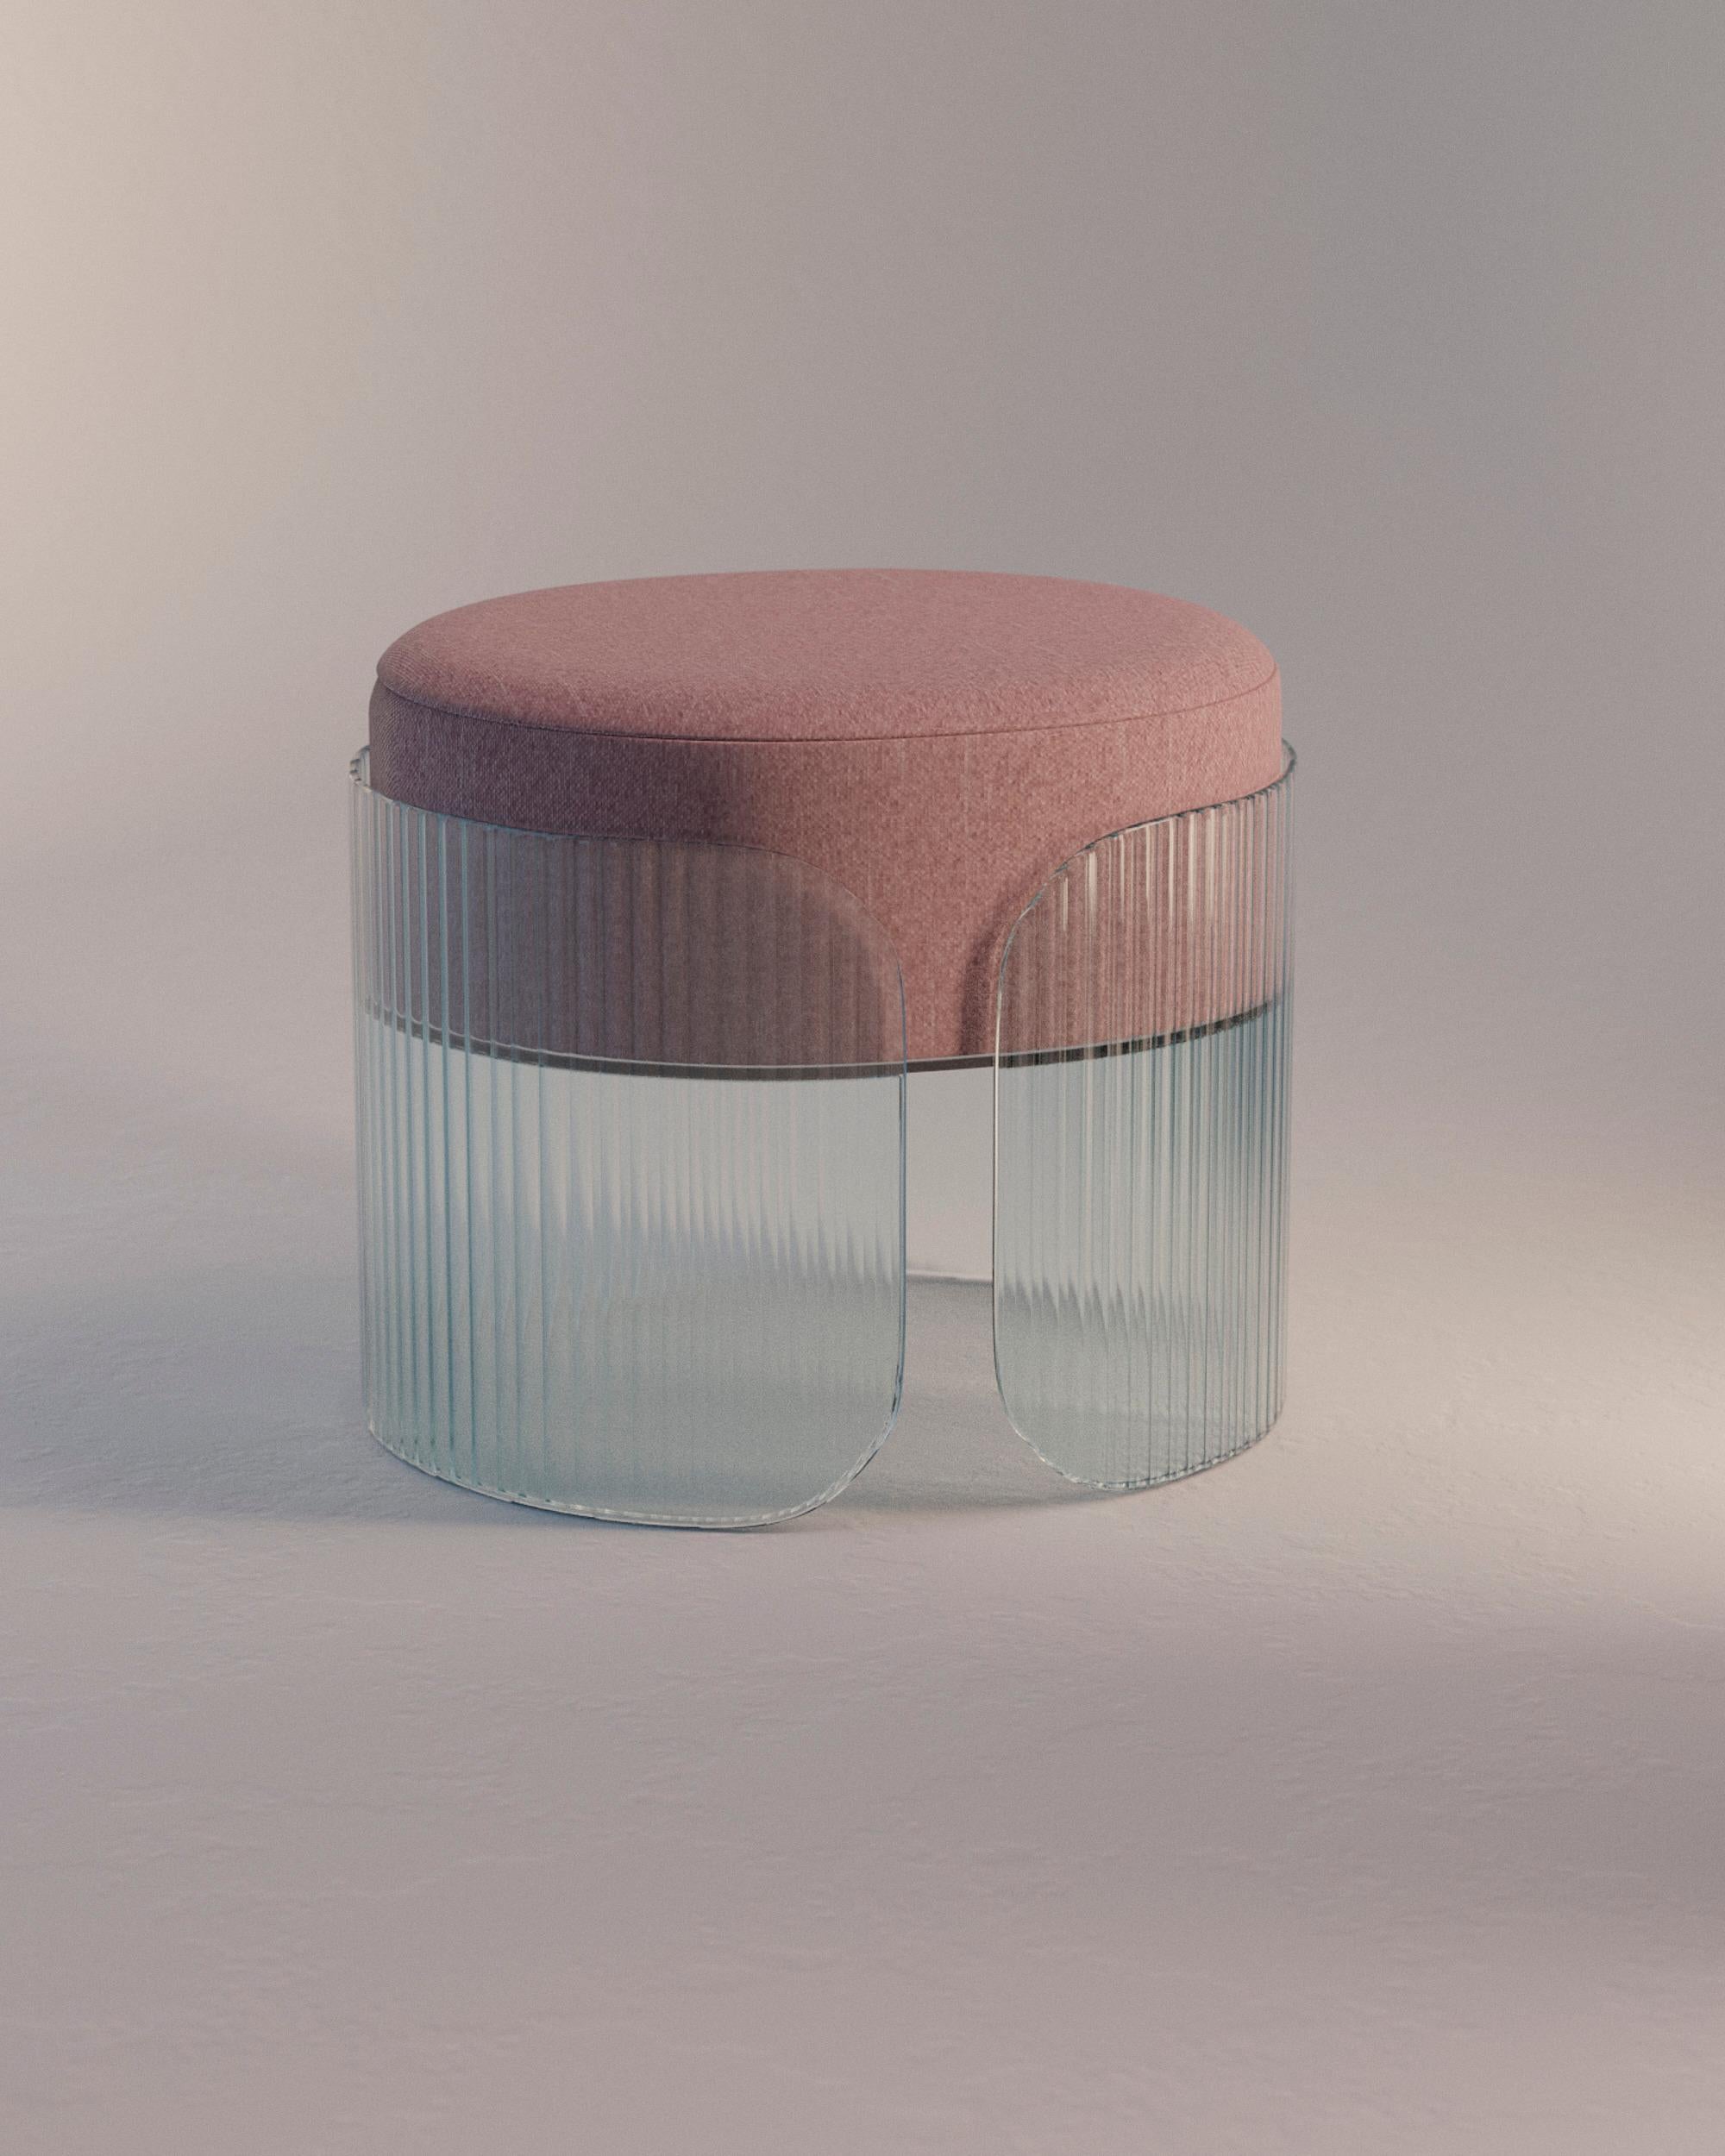 Pink Sublime Ottoman S by Glass Variations
Dimensions: W 45 x D 54 x H 42 cm
Materials: Glass.
Fabric not included.

Bina Baitel imagined the SUBLIME glass ottomans as an allegory of Light and a true challenge with glass material. The creamy white